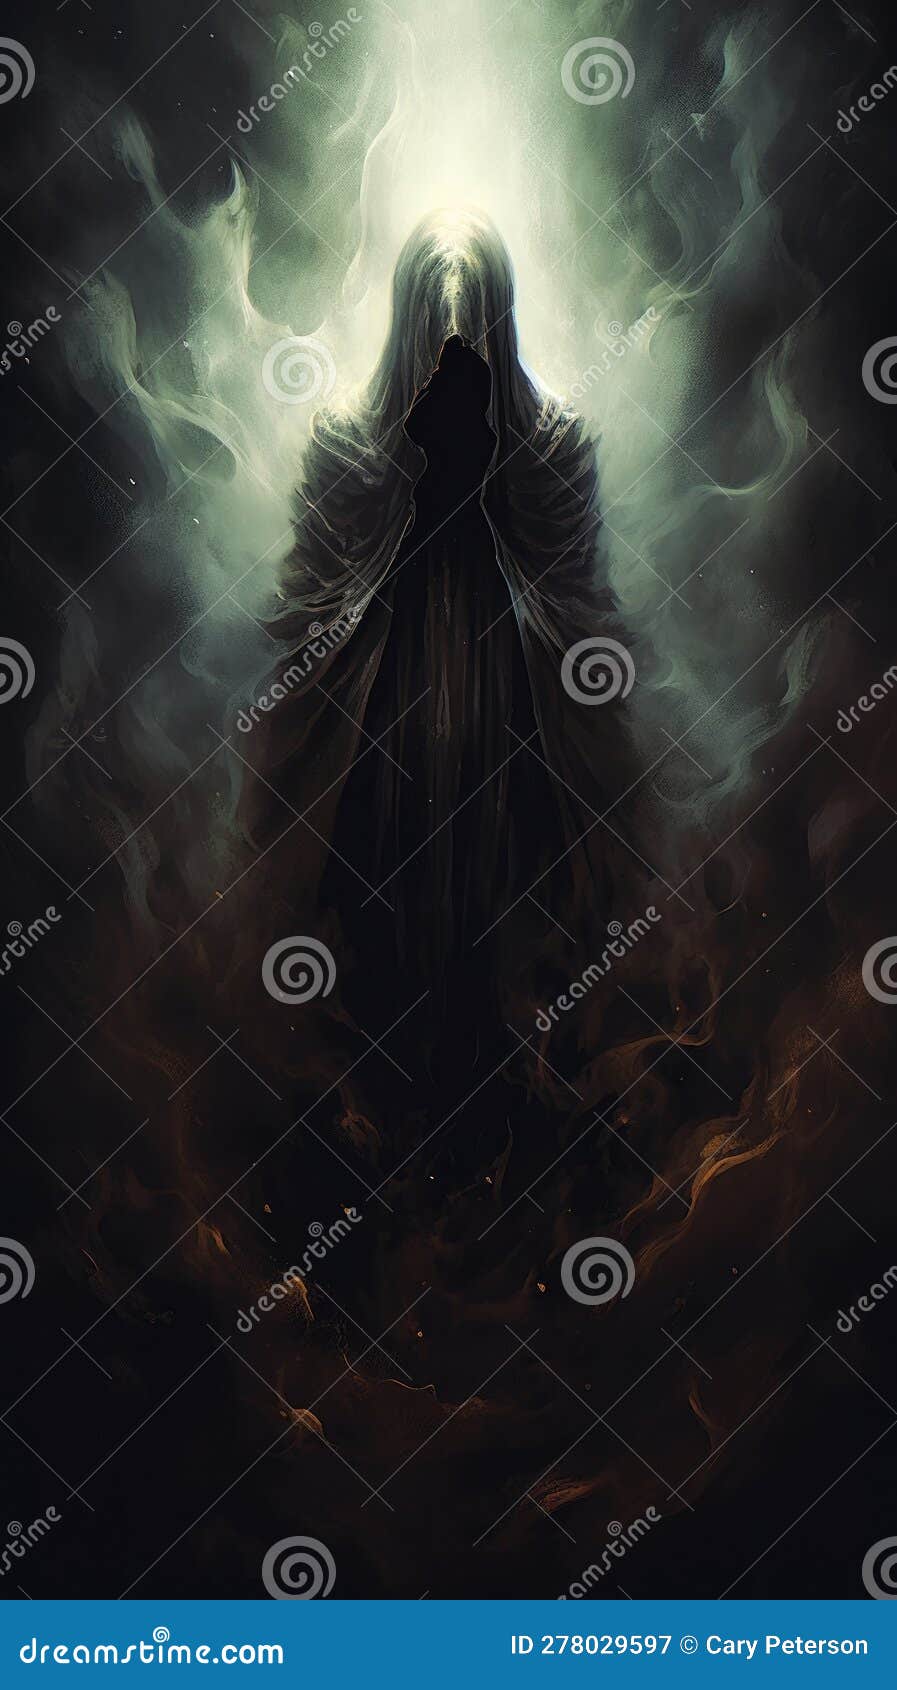 the ghost of gloom: a creepy person wearing flowing robes from the al plane of fire